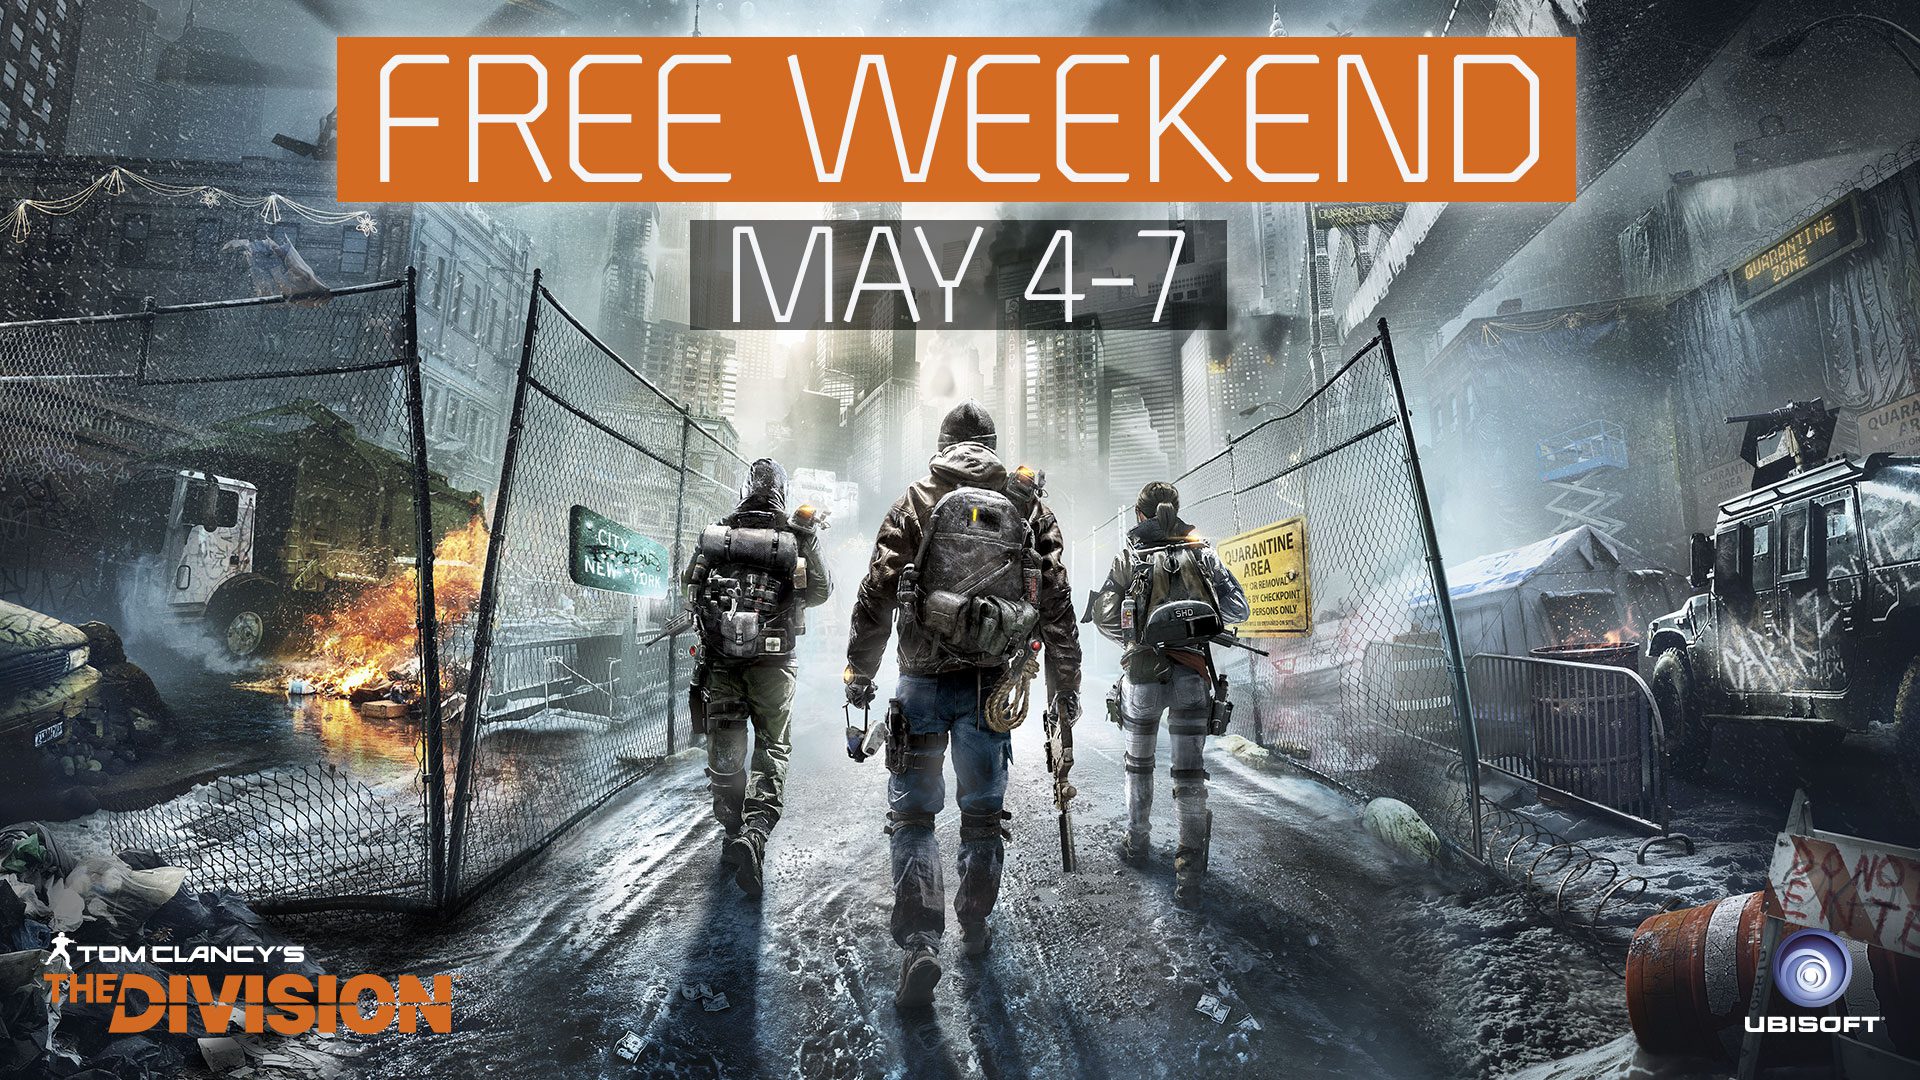 Tom Clancy’s The Division offers up free weekend